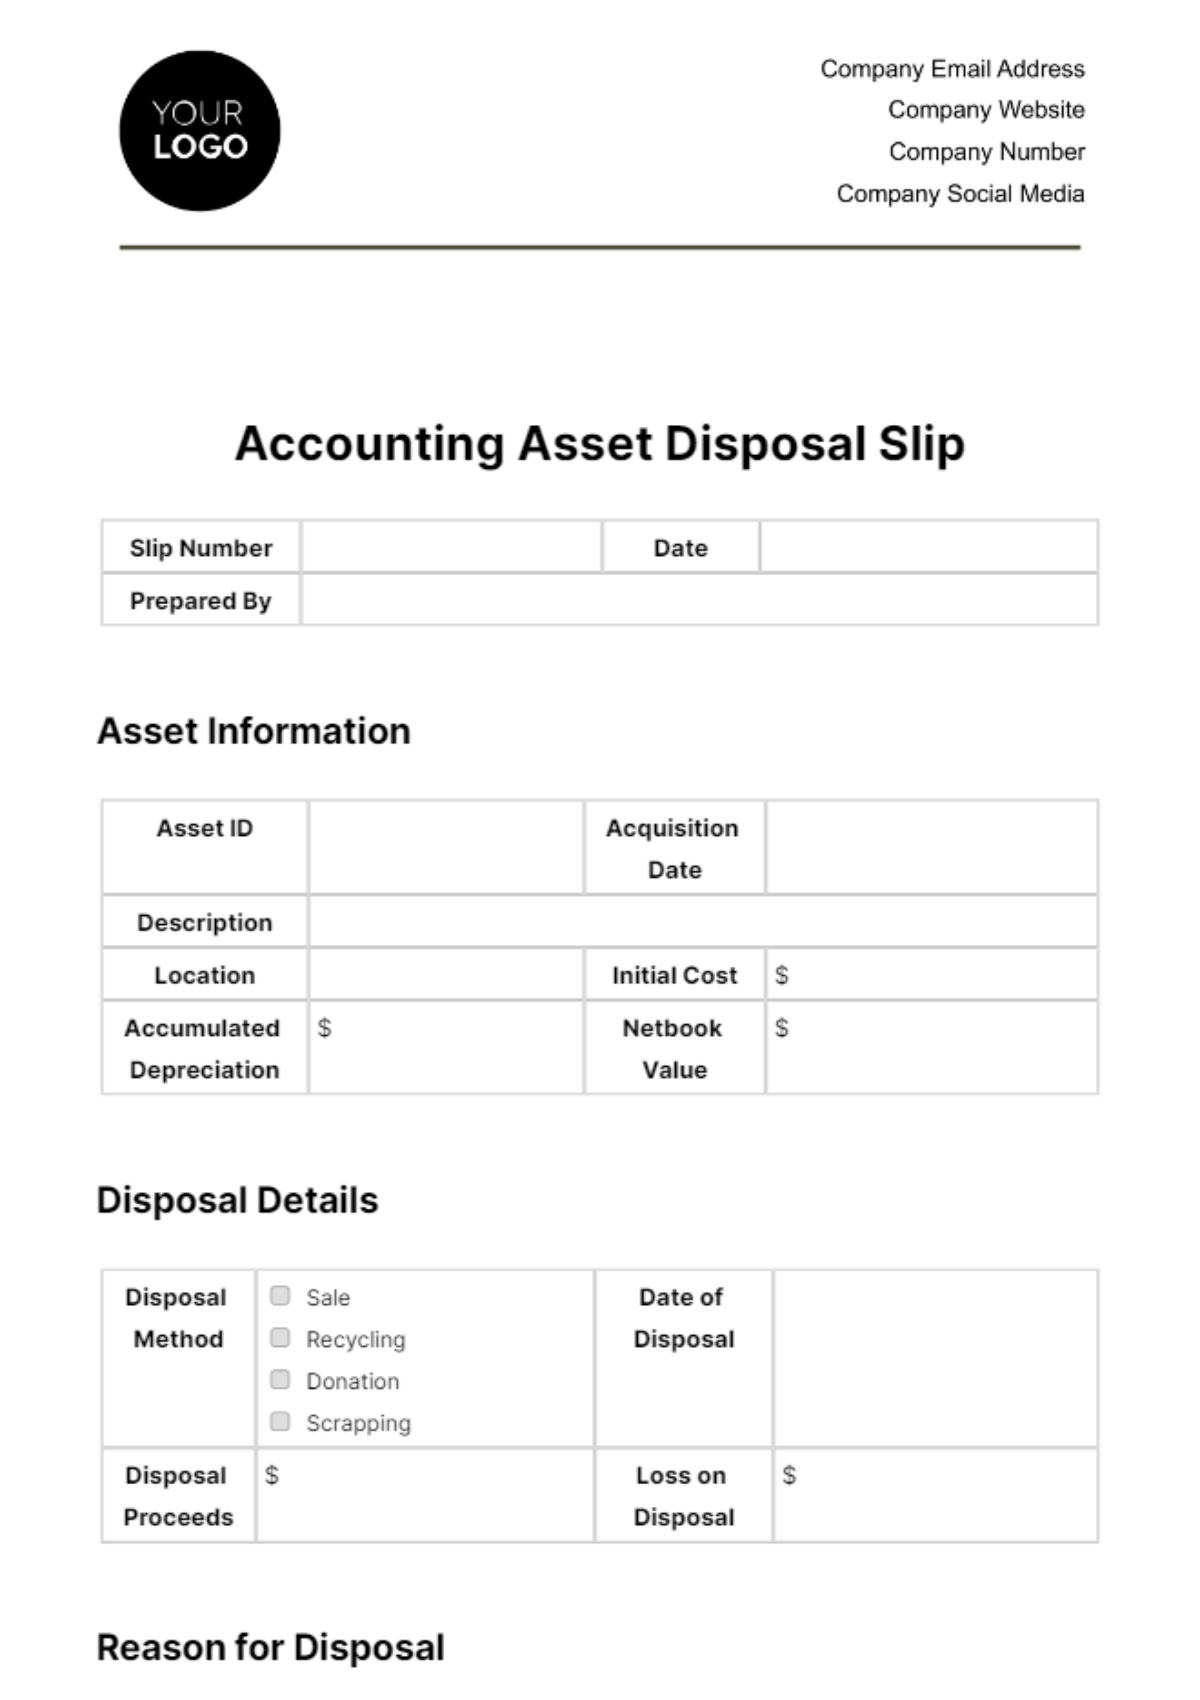 Free Accounting Asset Disposal Slip Template